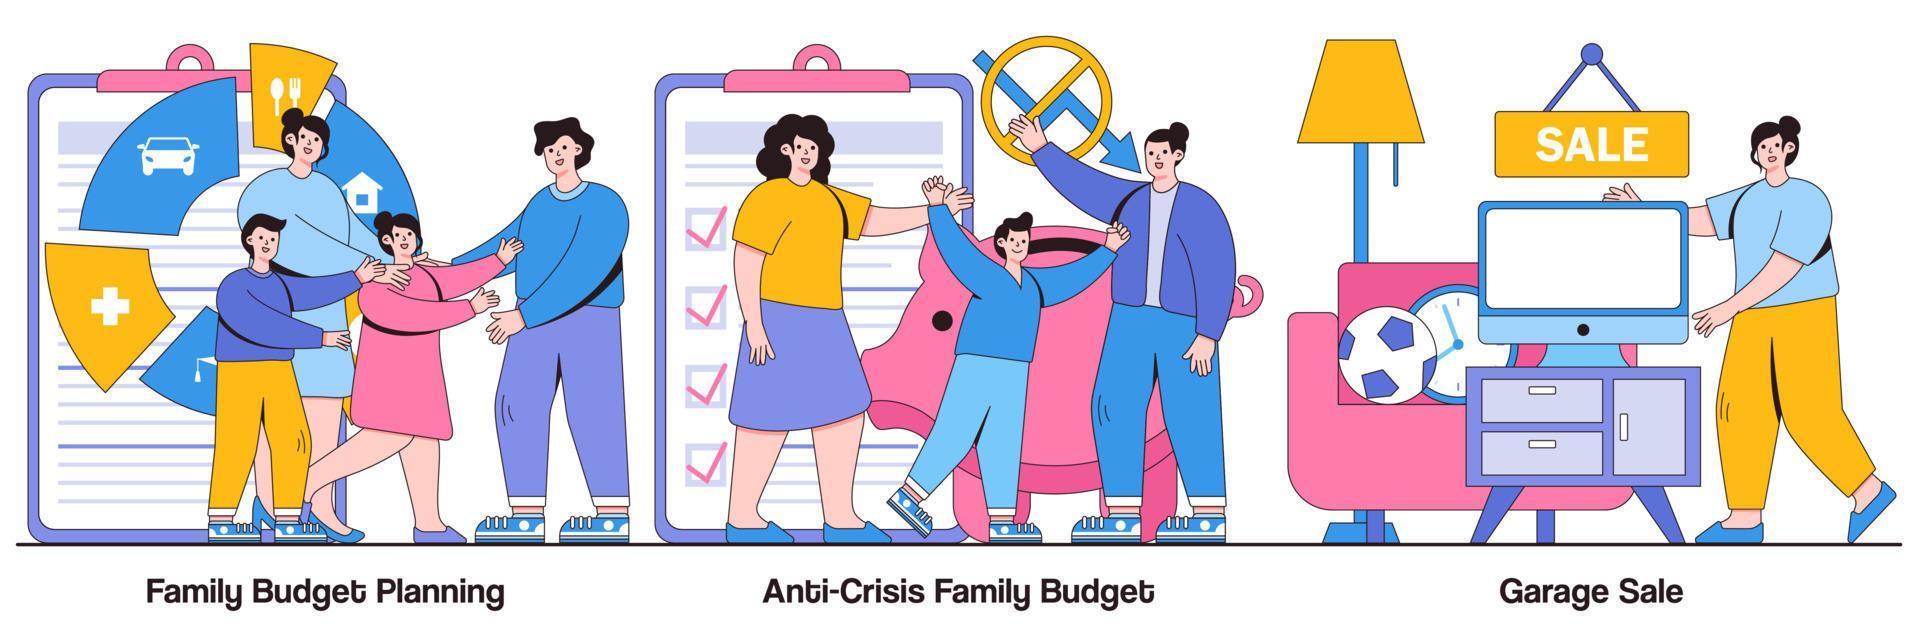 Family Budget Planning, Anti-Crisis Family Budget, and Garage Sale Illustrated Pack vector